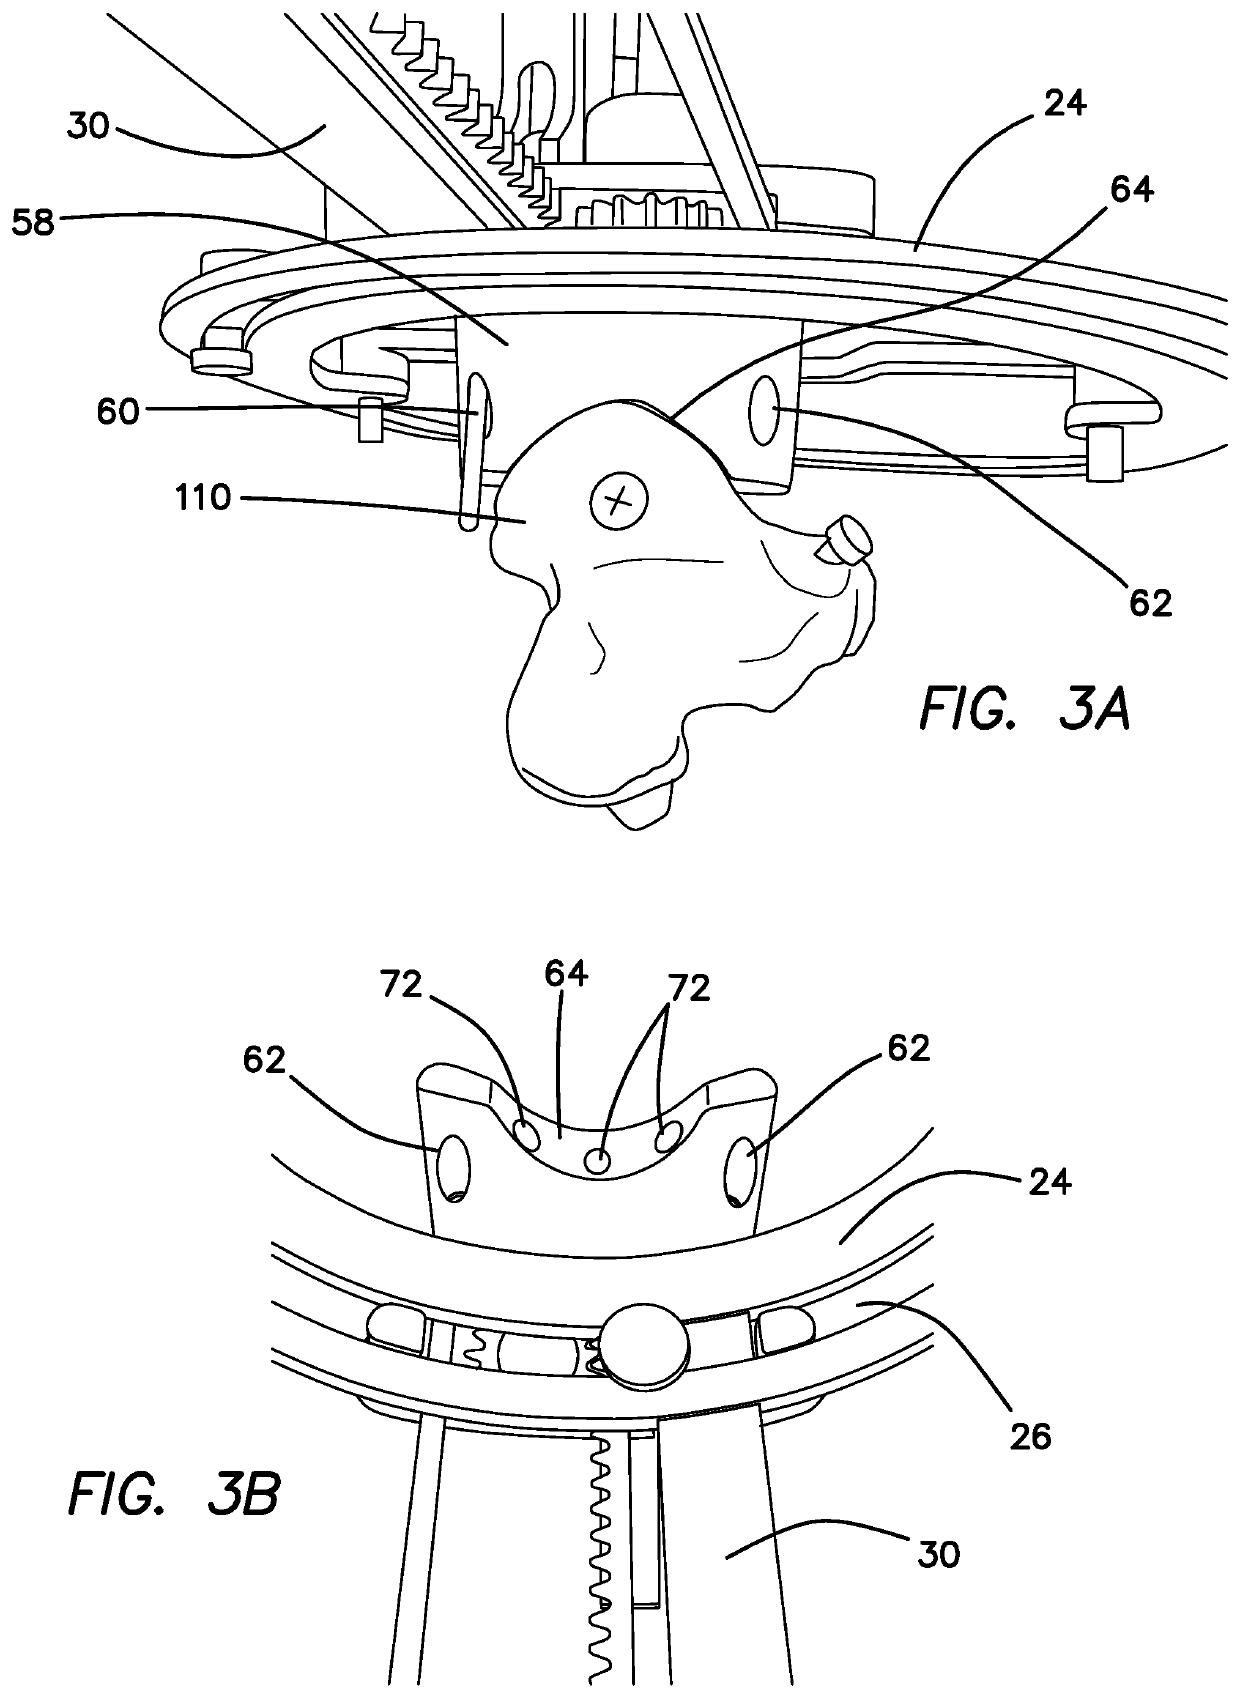 Method and Apparatus for Treating Cranial Cruciate Ligament Disease in Canines